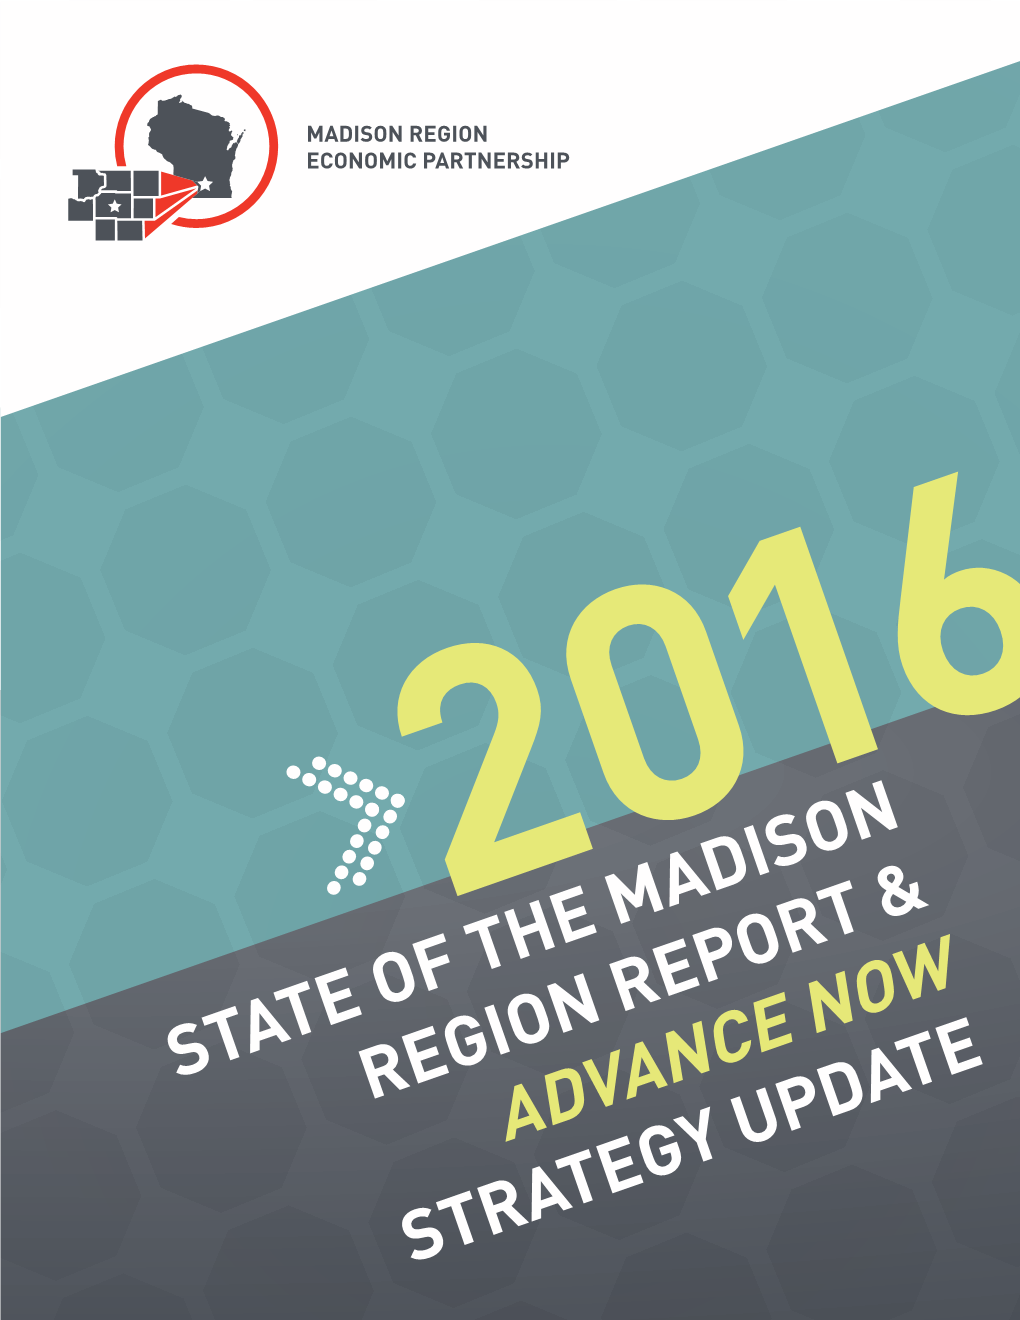 ADVANCE NOW STRATEGY UPDATE 2 2016 STATE of the MADISON REGION REPORT & ADVANCE NOW UPDATE // in a State of Advancement